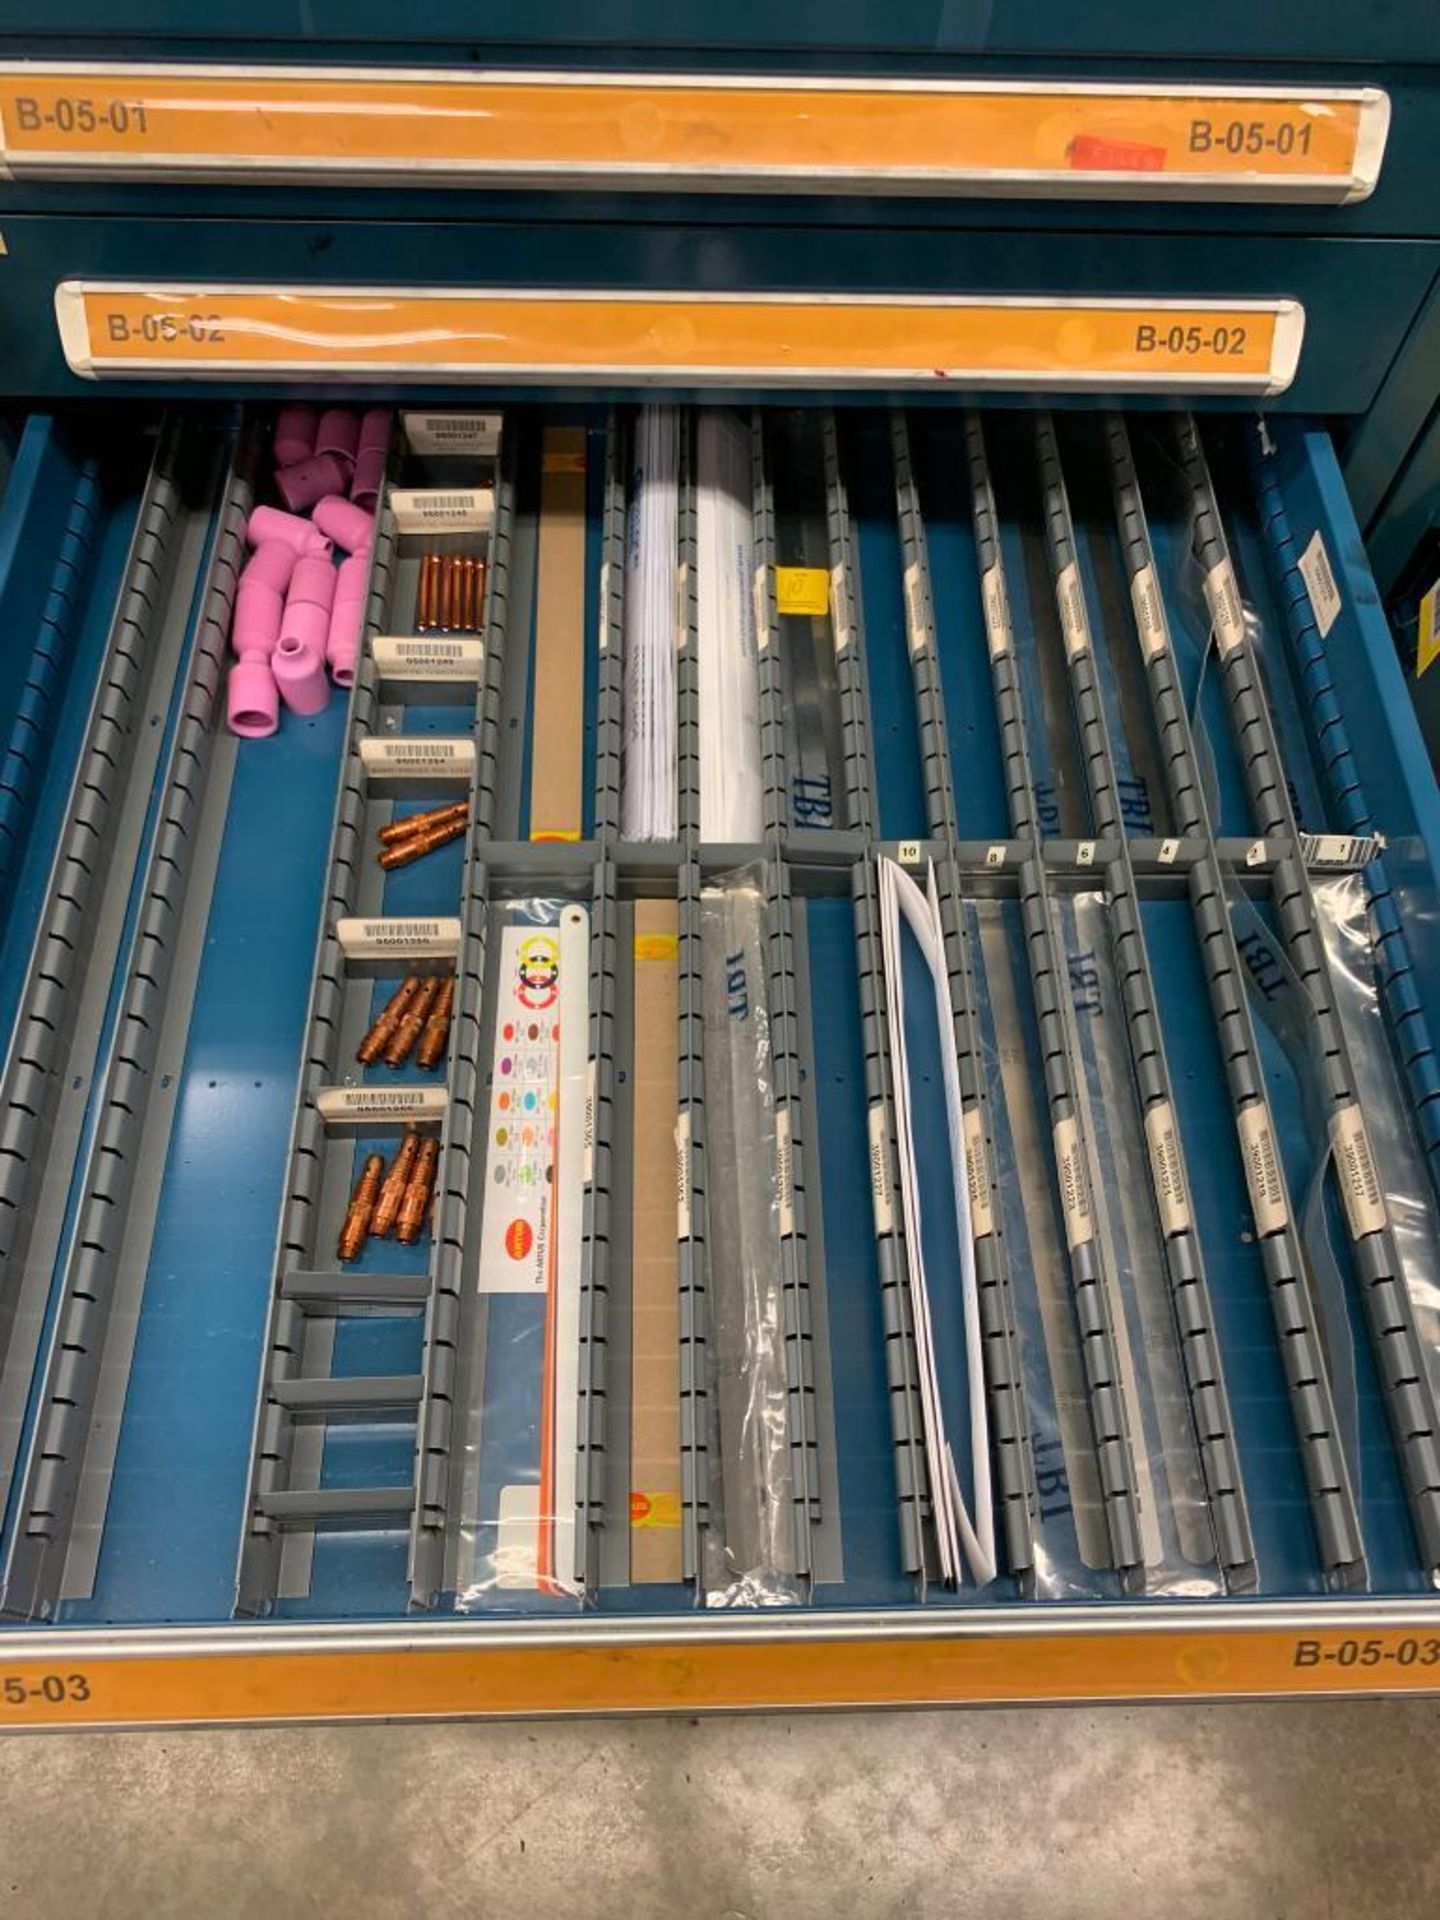 Vidmar 7-Drawer Cabinet w/ Assorted Files, Feeler Gage, Deburring Tools, Saw Blades - Image 4 of 8